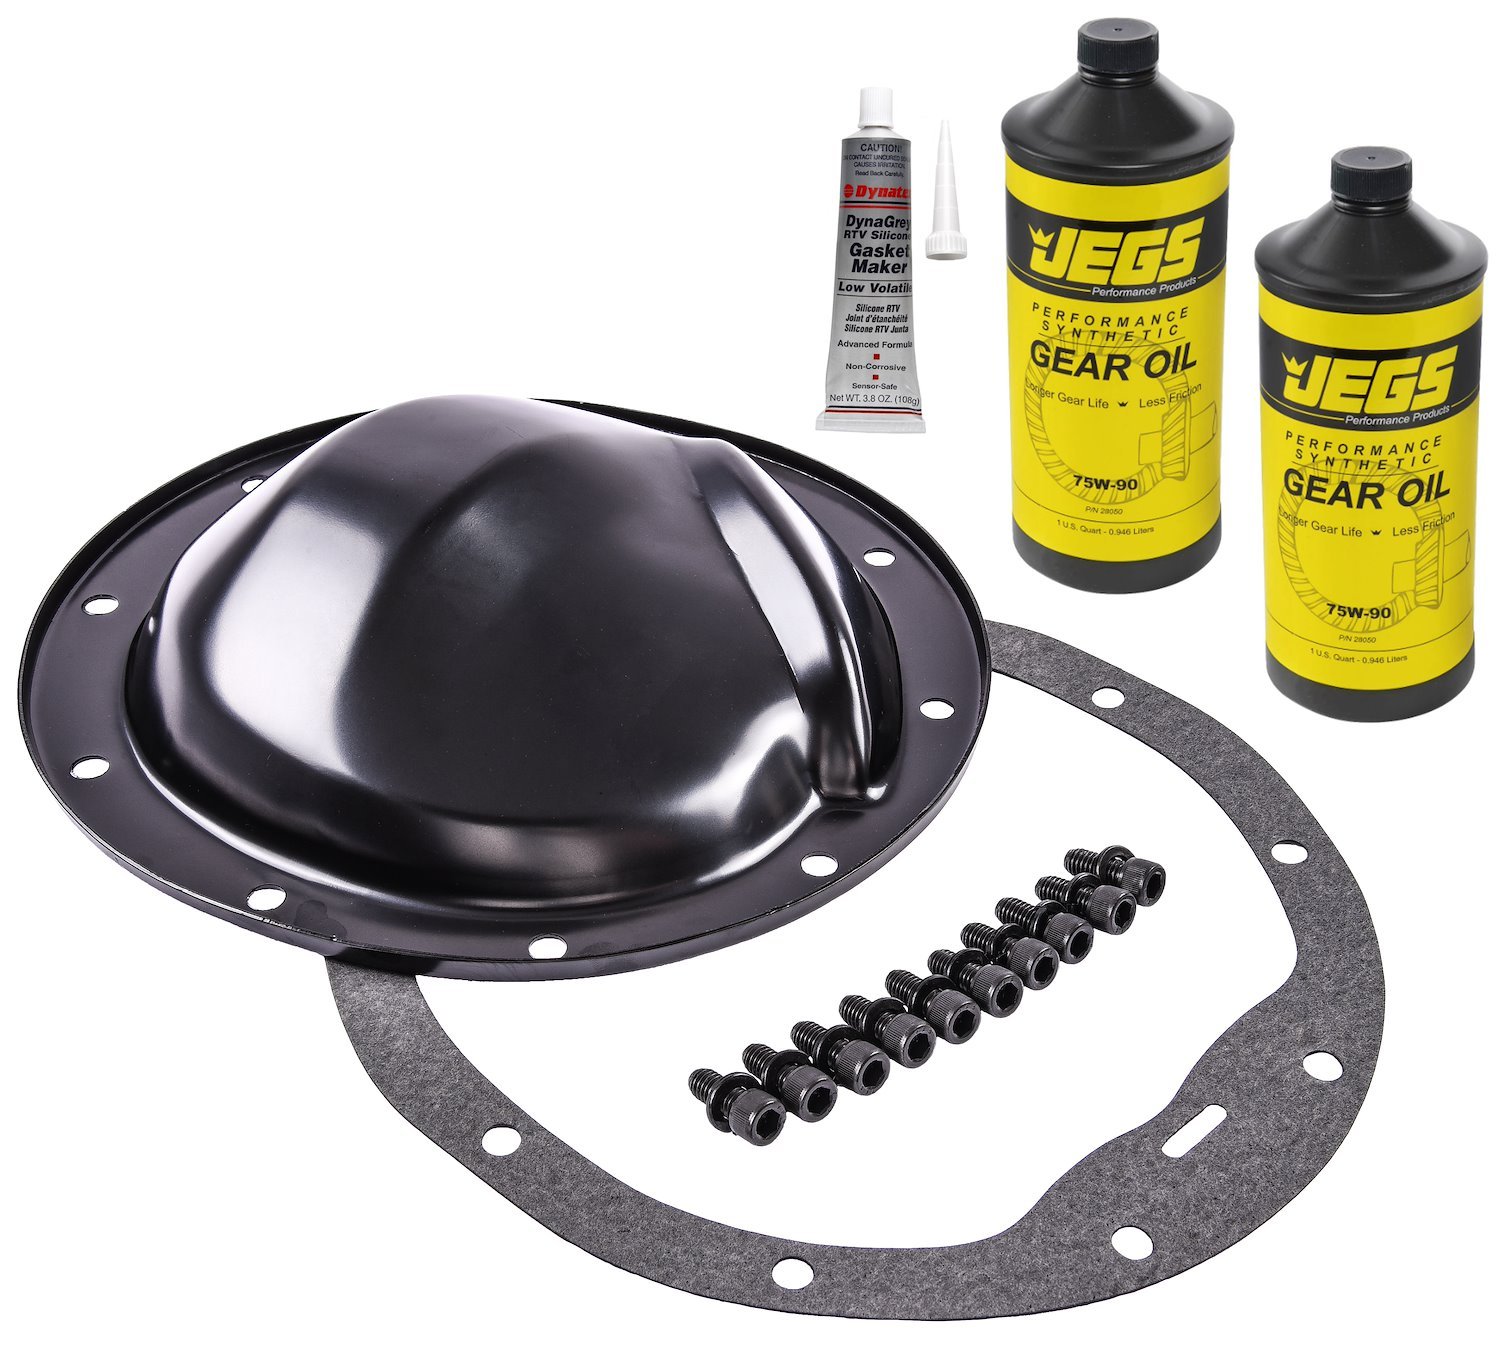 Black EDP-Coated Steel Differential Cover & Gear Oil Kit [GM 8.2 in. 10-Bolt]